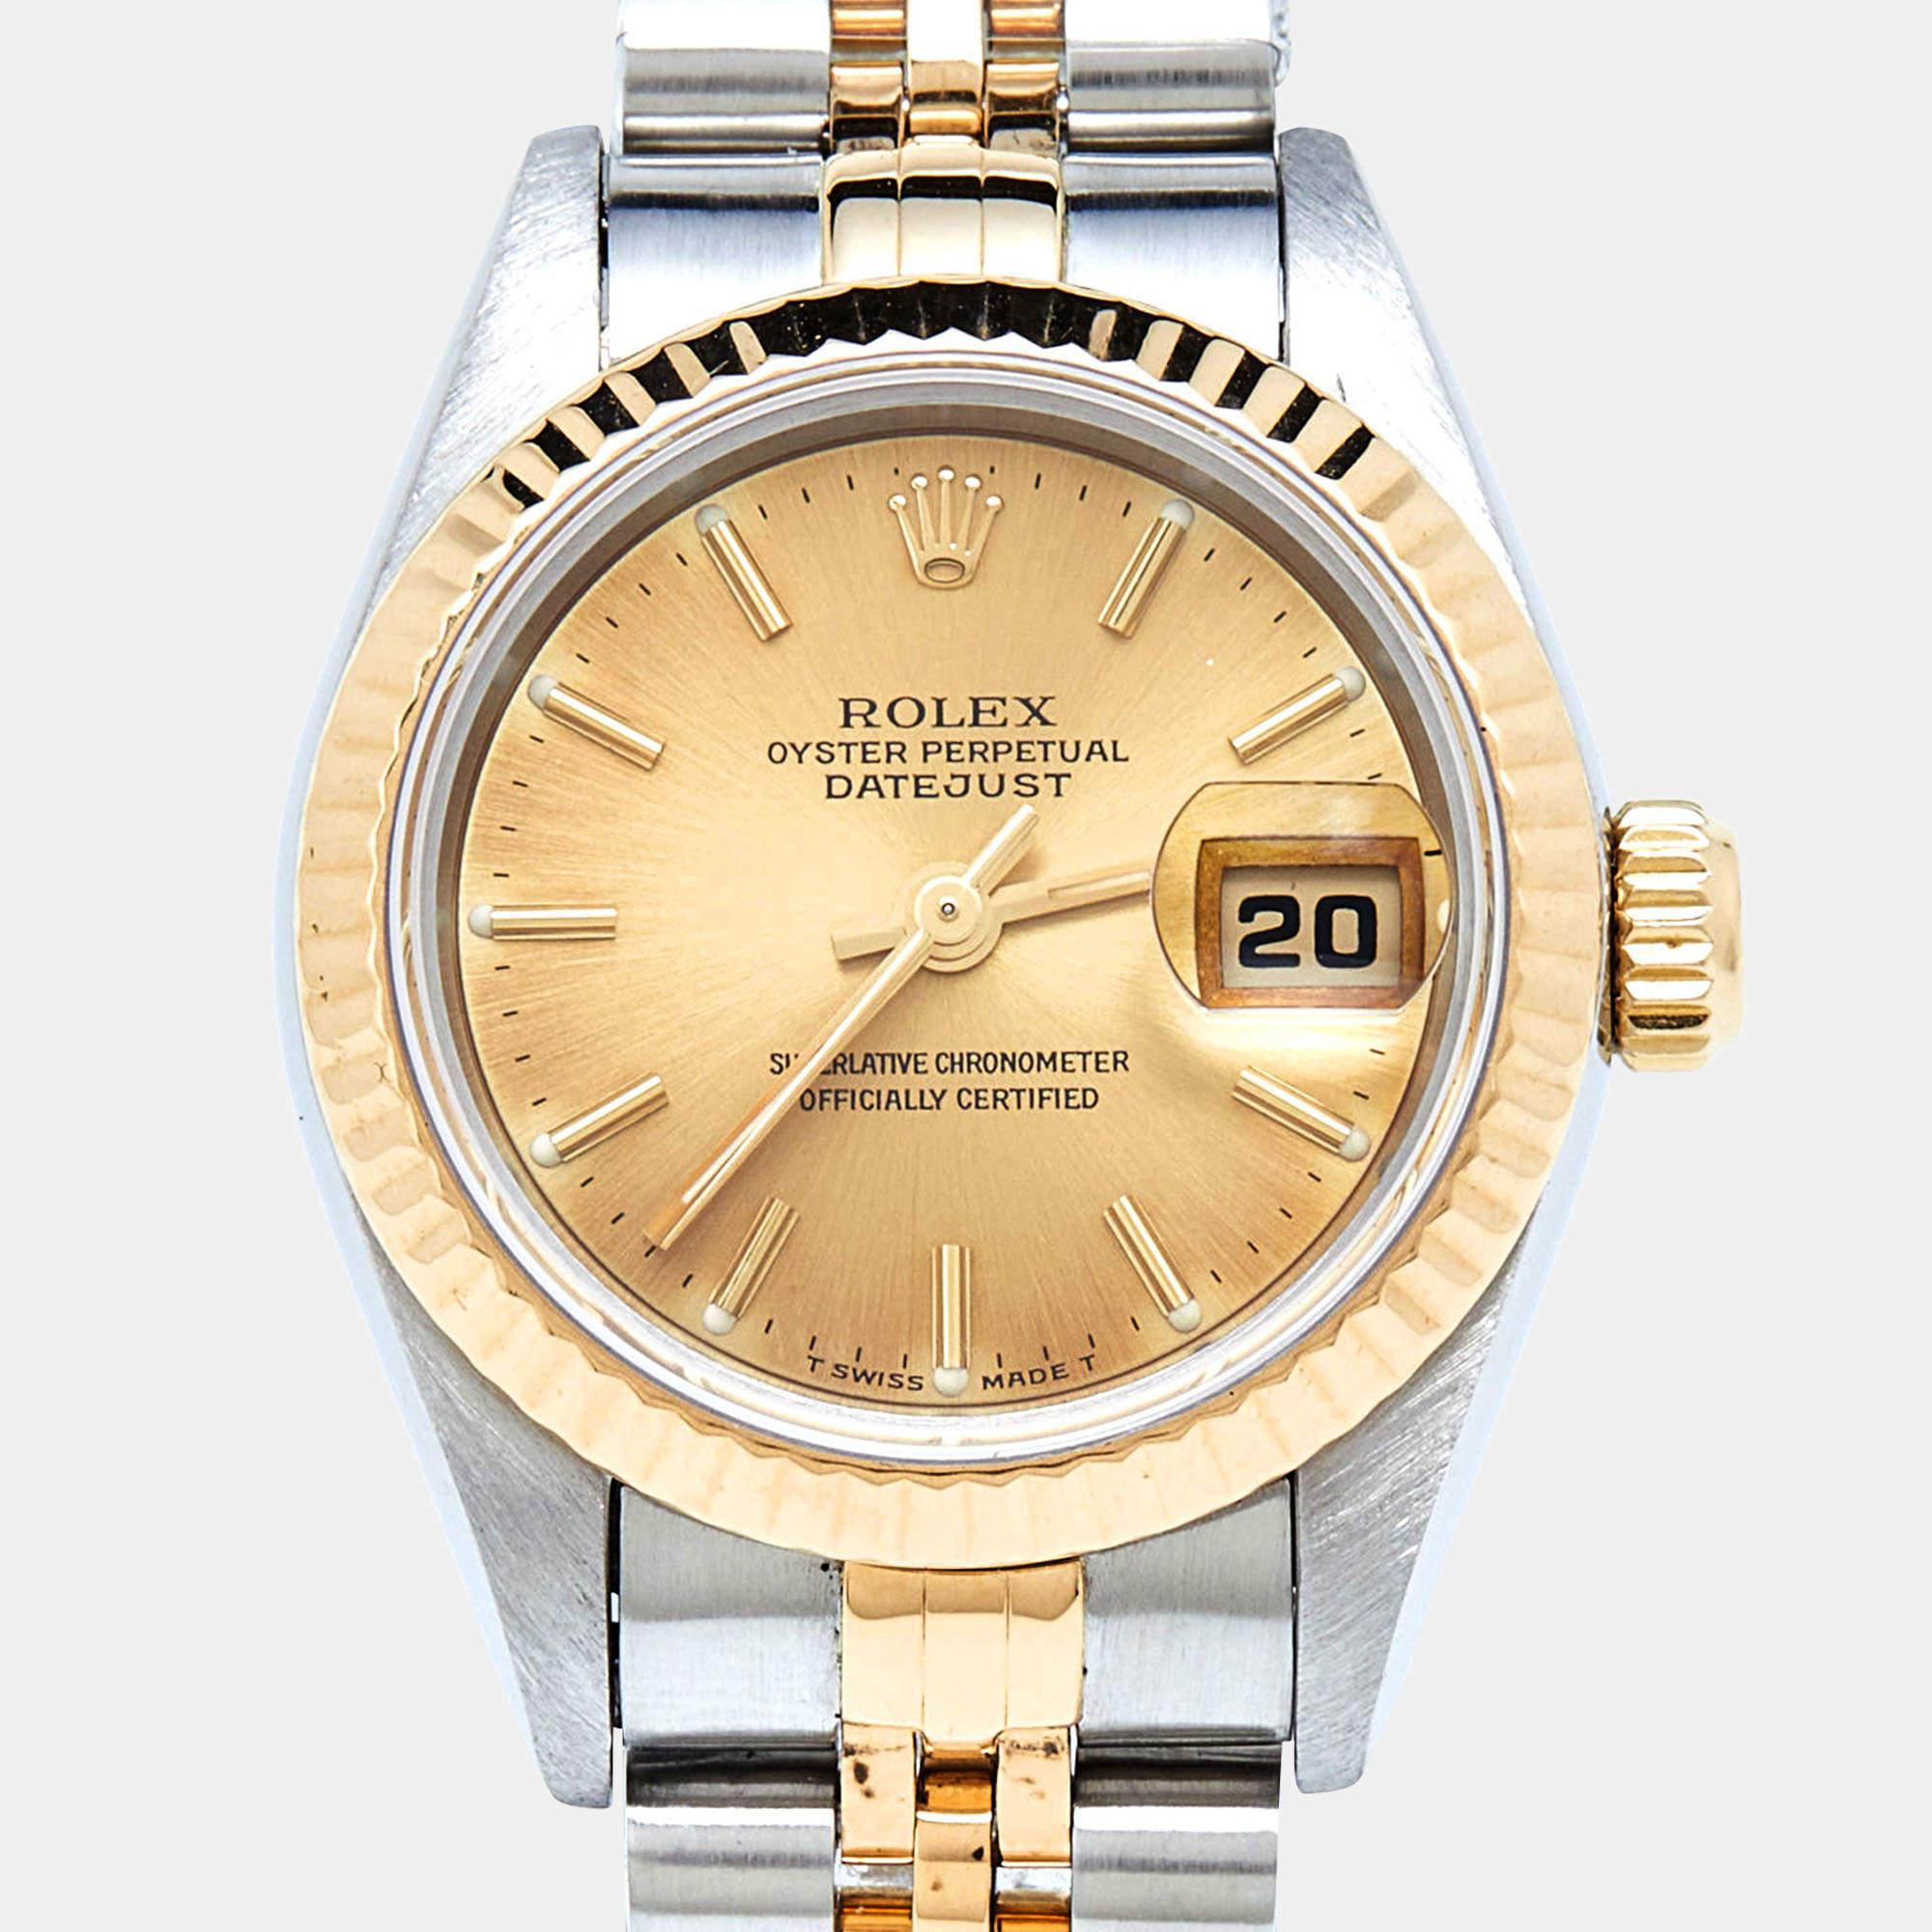 The Datejust is one of the most recognized and coveted watches from the house of Rolex. It has a distinct look and an irrefutable appeal. Crafted in stainless steel and 18k yellow gold, this authentic Rolex Datejust 69173 wristwatch has the